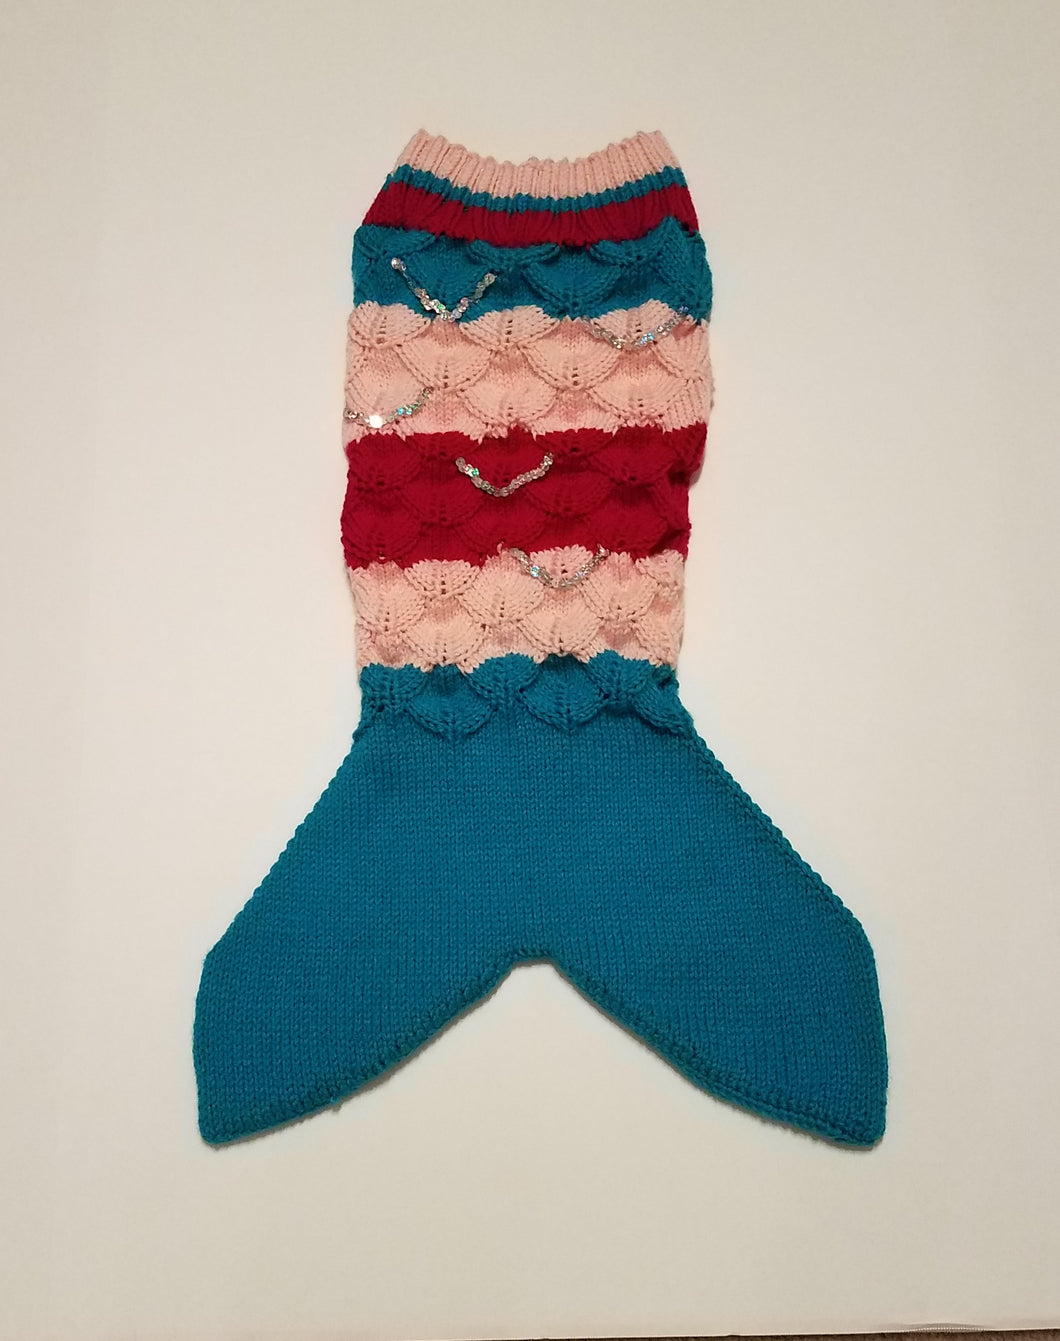 Small Child's Mermaid Tail | Hand-knit | Acrylic Yarn | Sequins